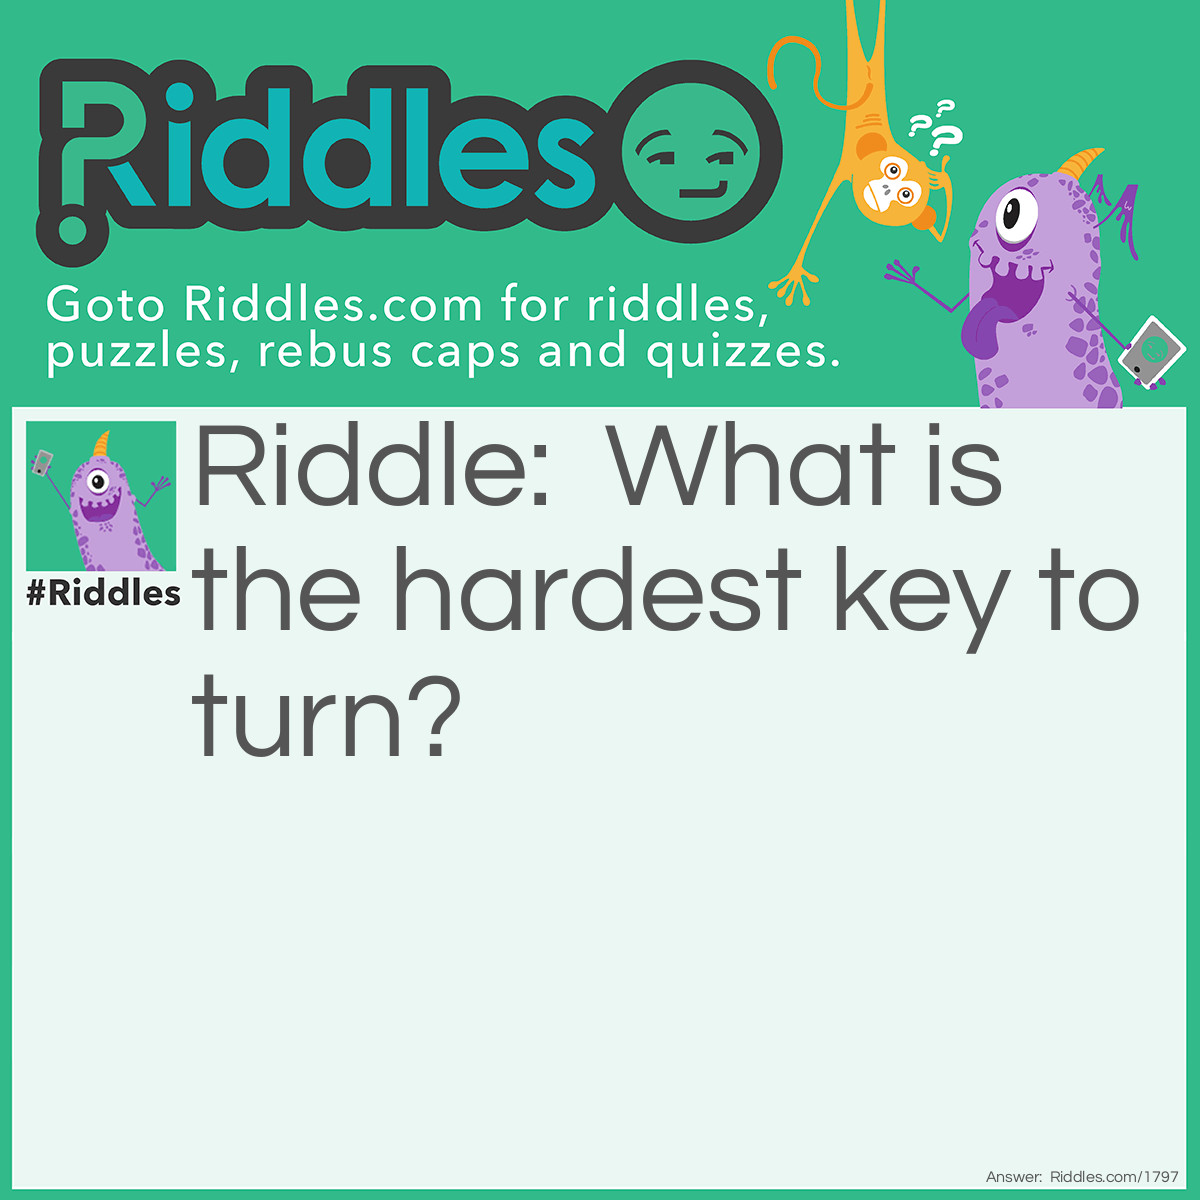 Riddle: What is the hardest key to turn? Answer: A don-key